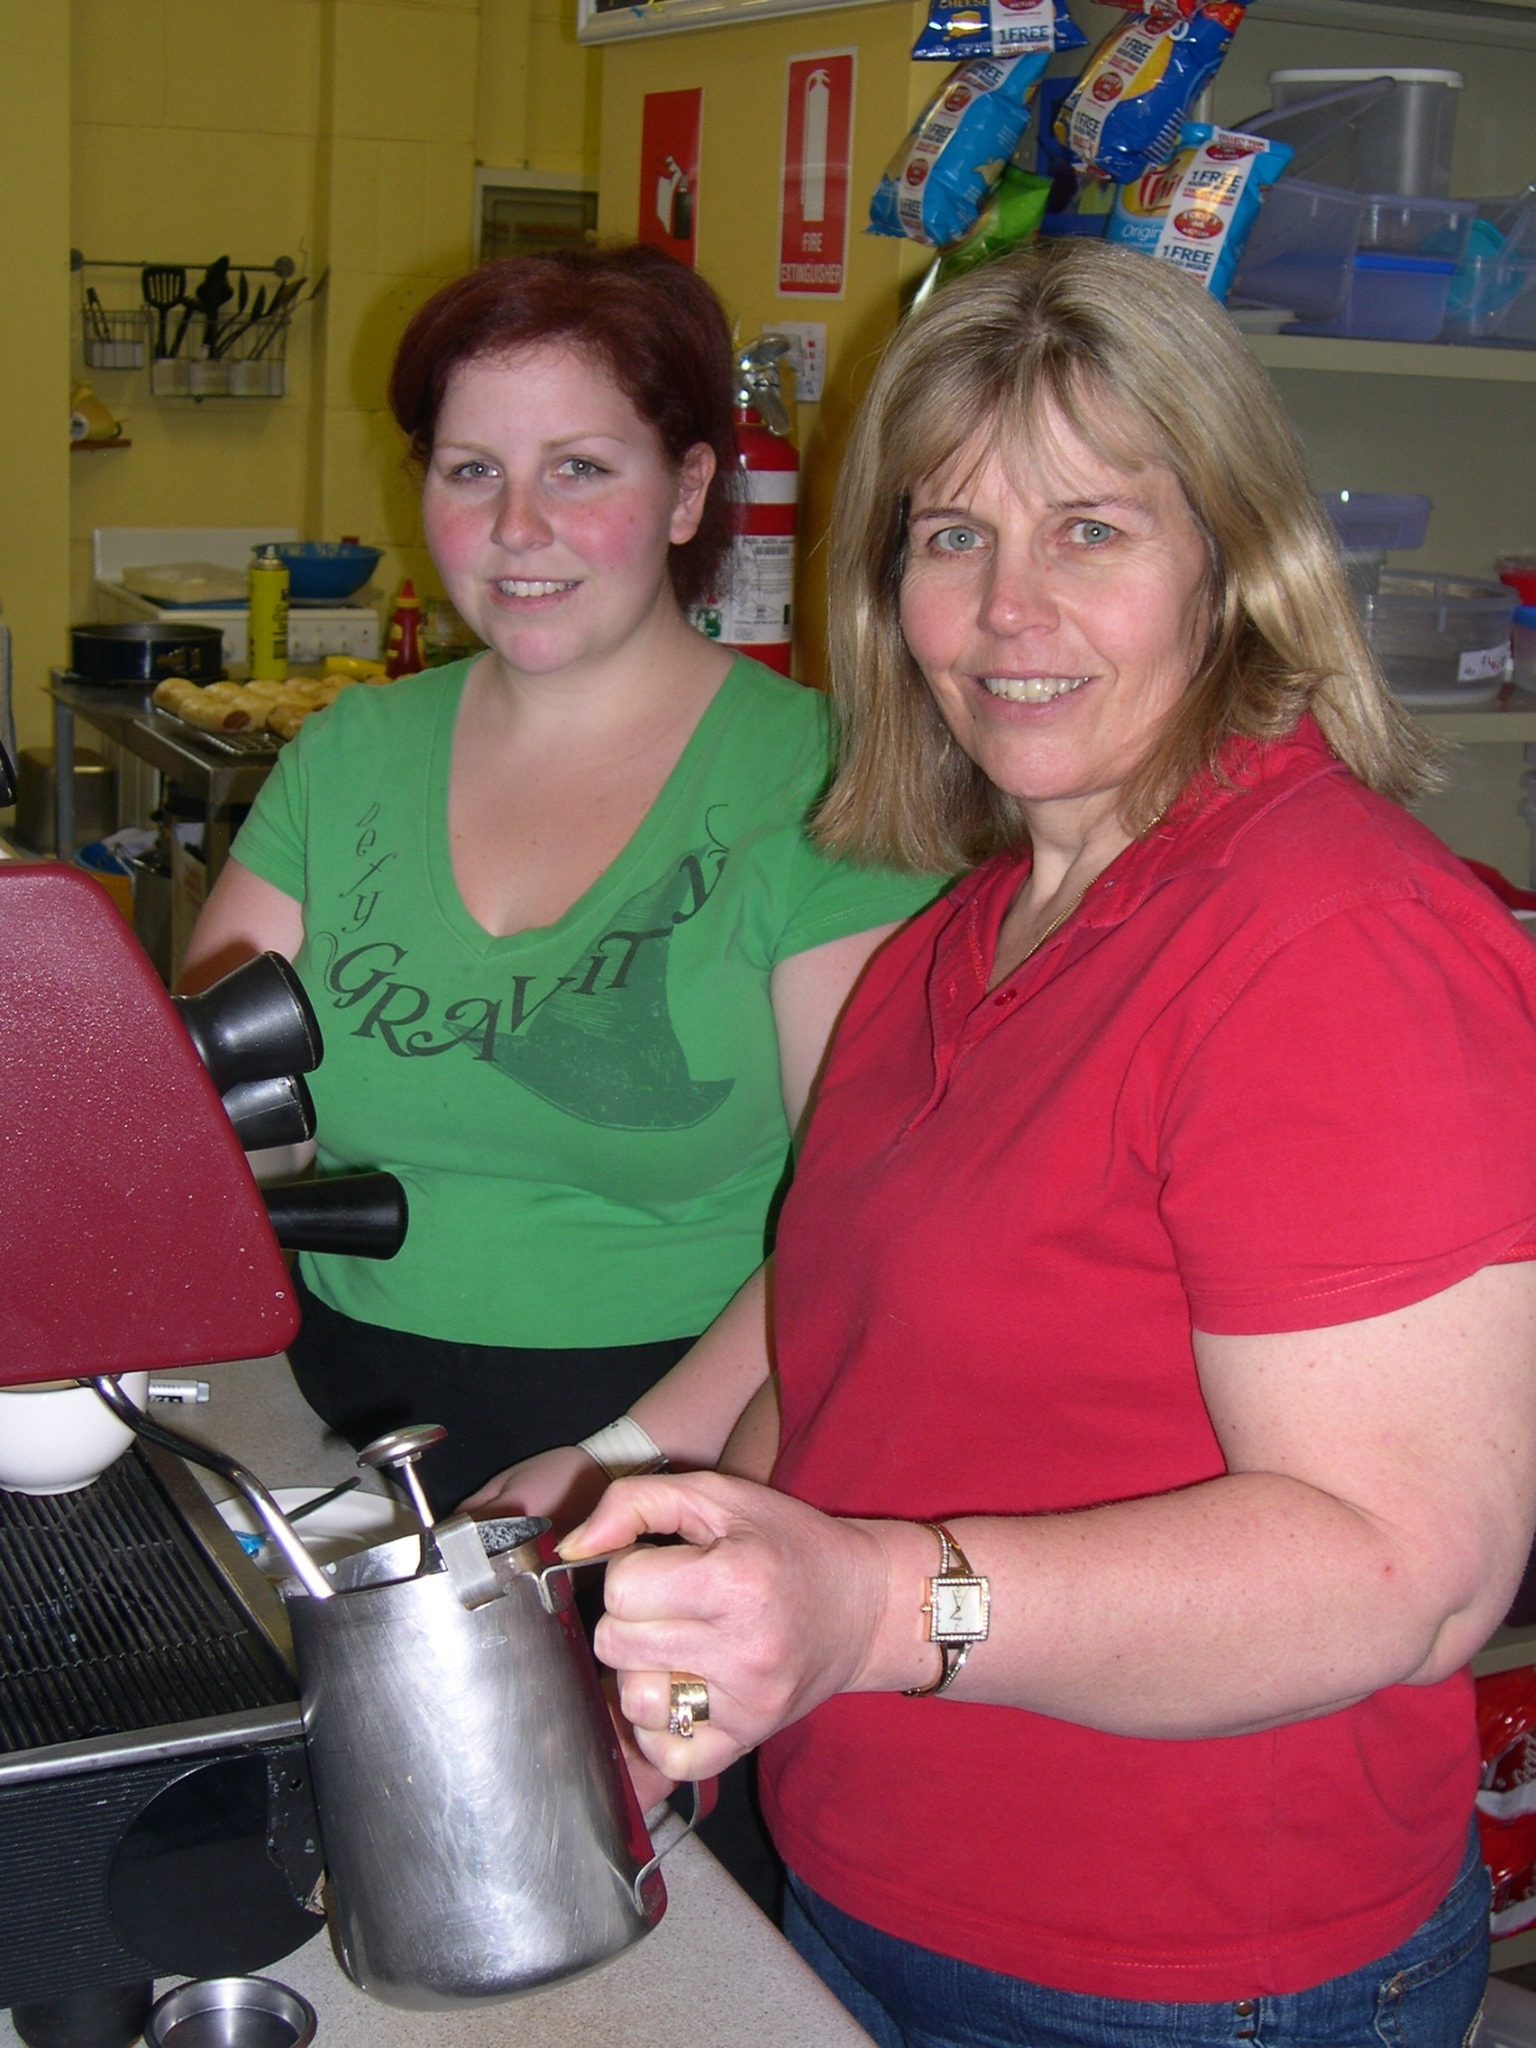 Leanne working alongside her daughter Kristy at the café